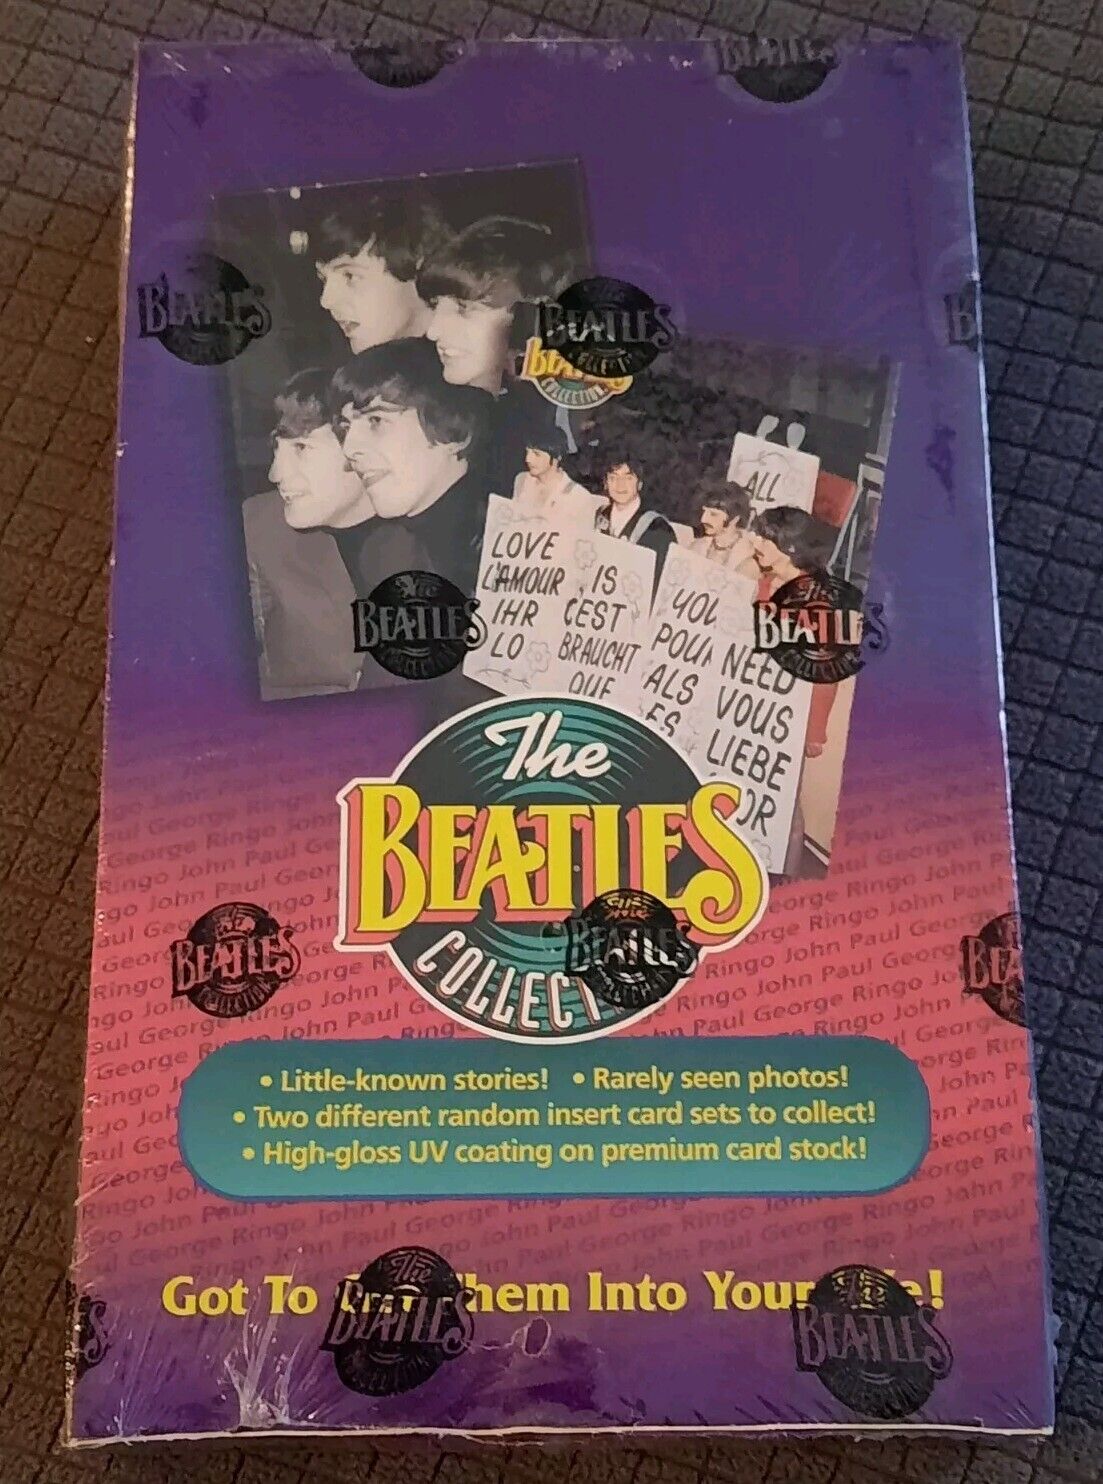 The Beatles Collection Trading Cards 1993 River Group 36 Pack Factory Sealed Box